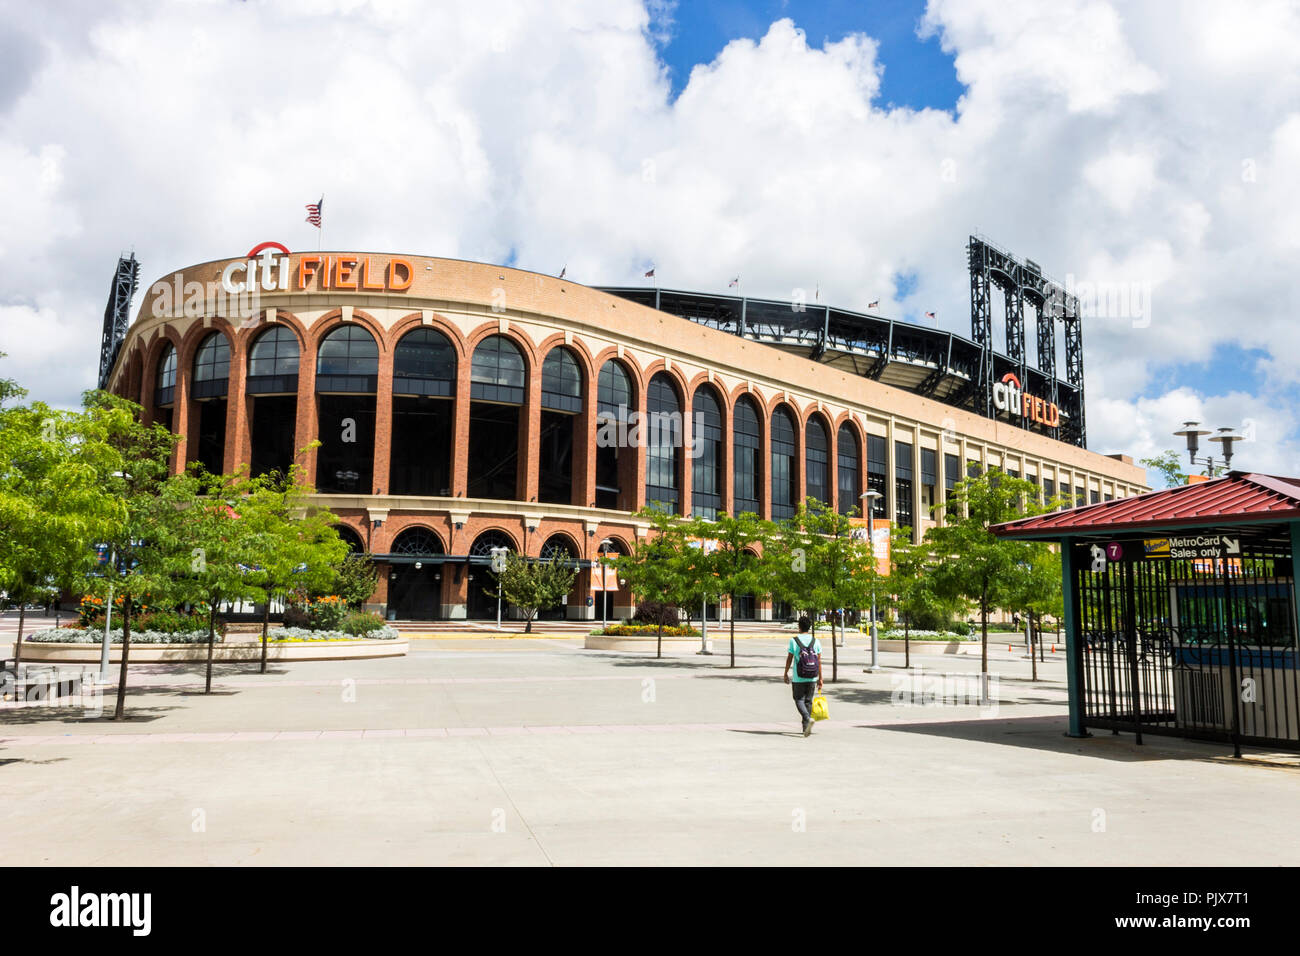 New York City. Citi Field, a baseball park located in Flushing Meadows Corona Park in the borough of Queens, home field of the New York Mets of the Na Stock Photo